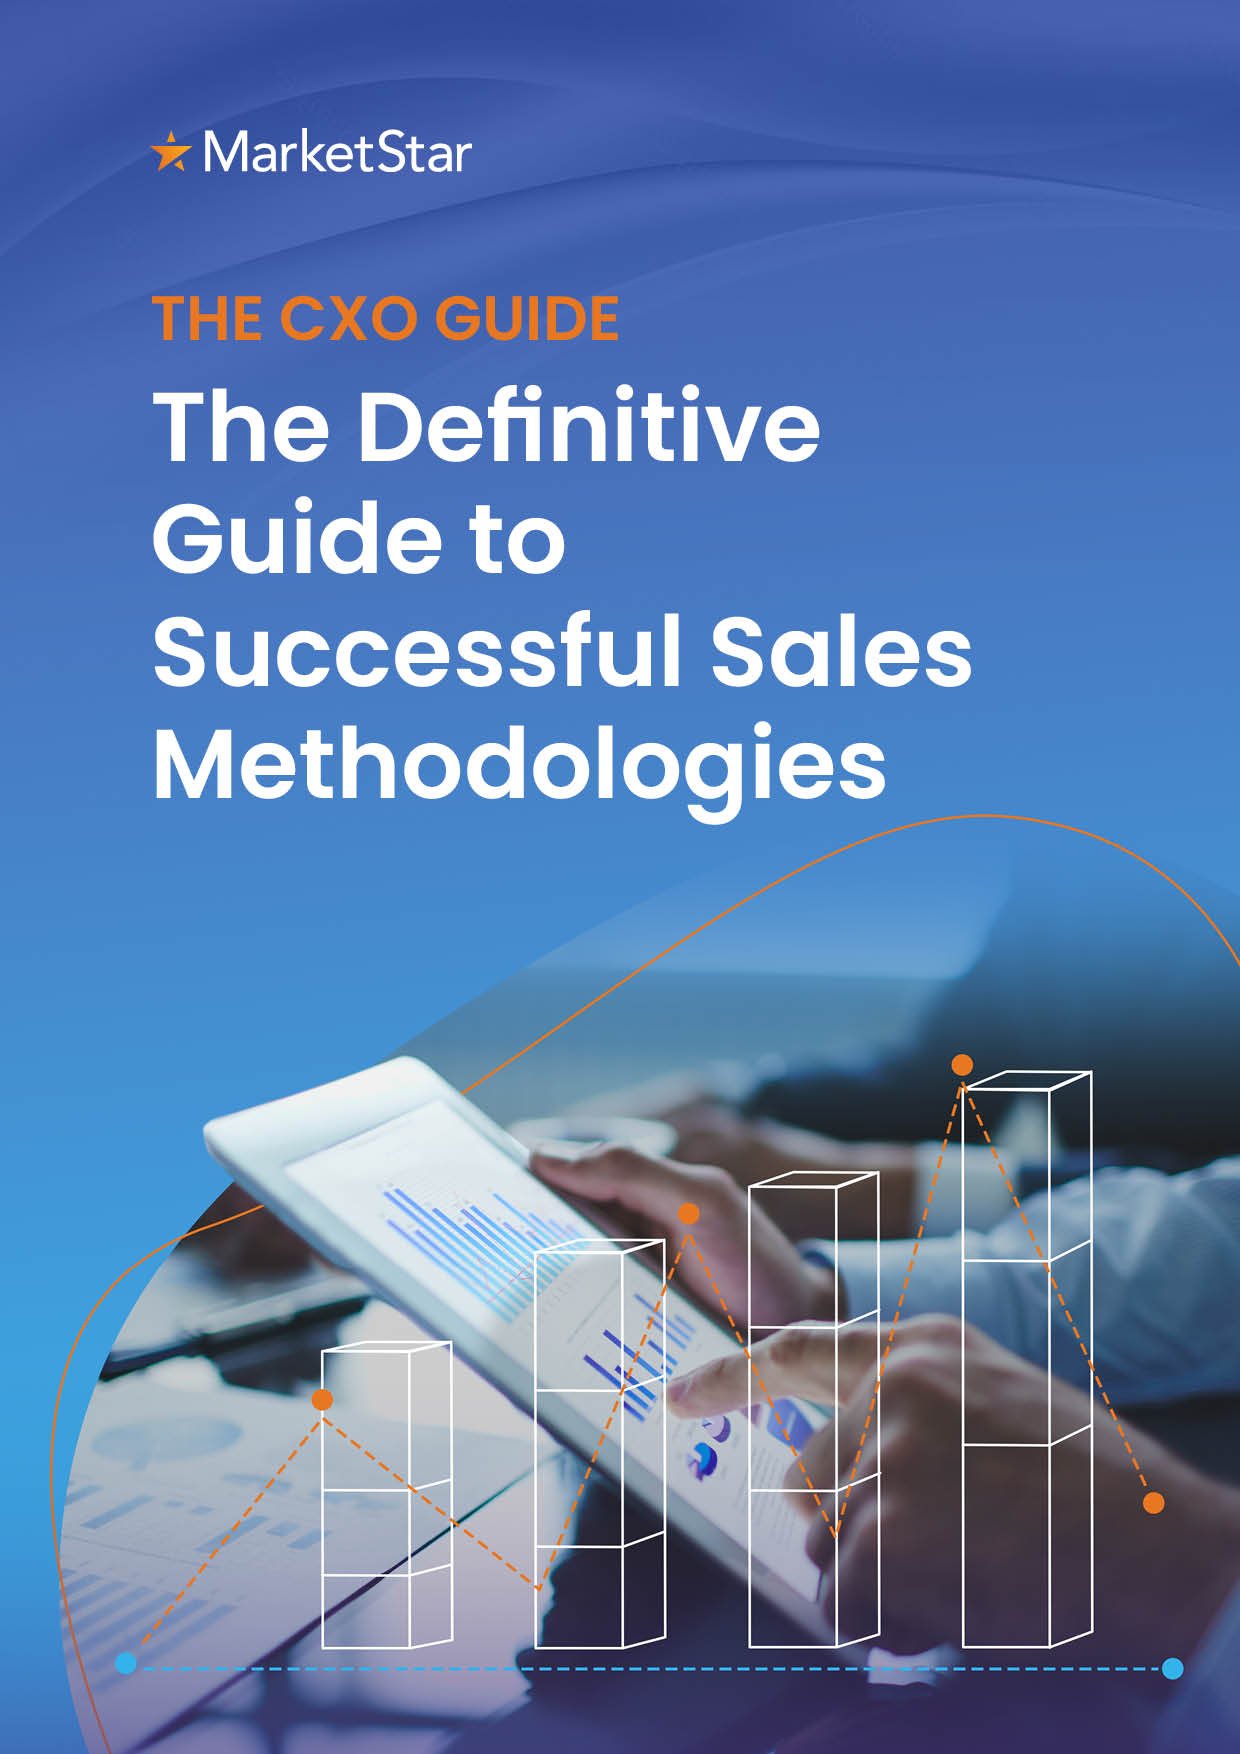 CXO_Guide_The Definitive Guide to Successful Sales Methodologies